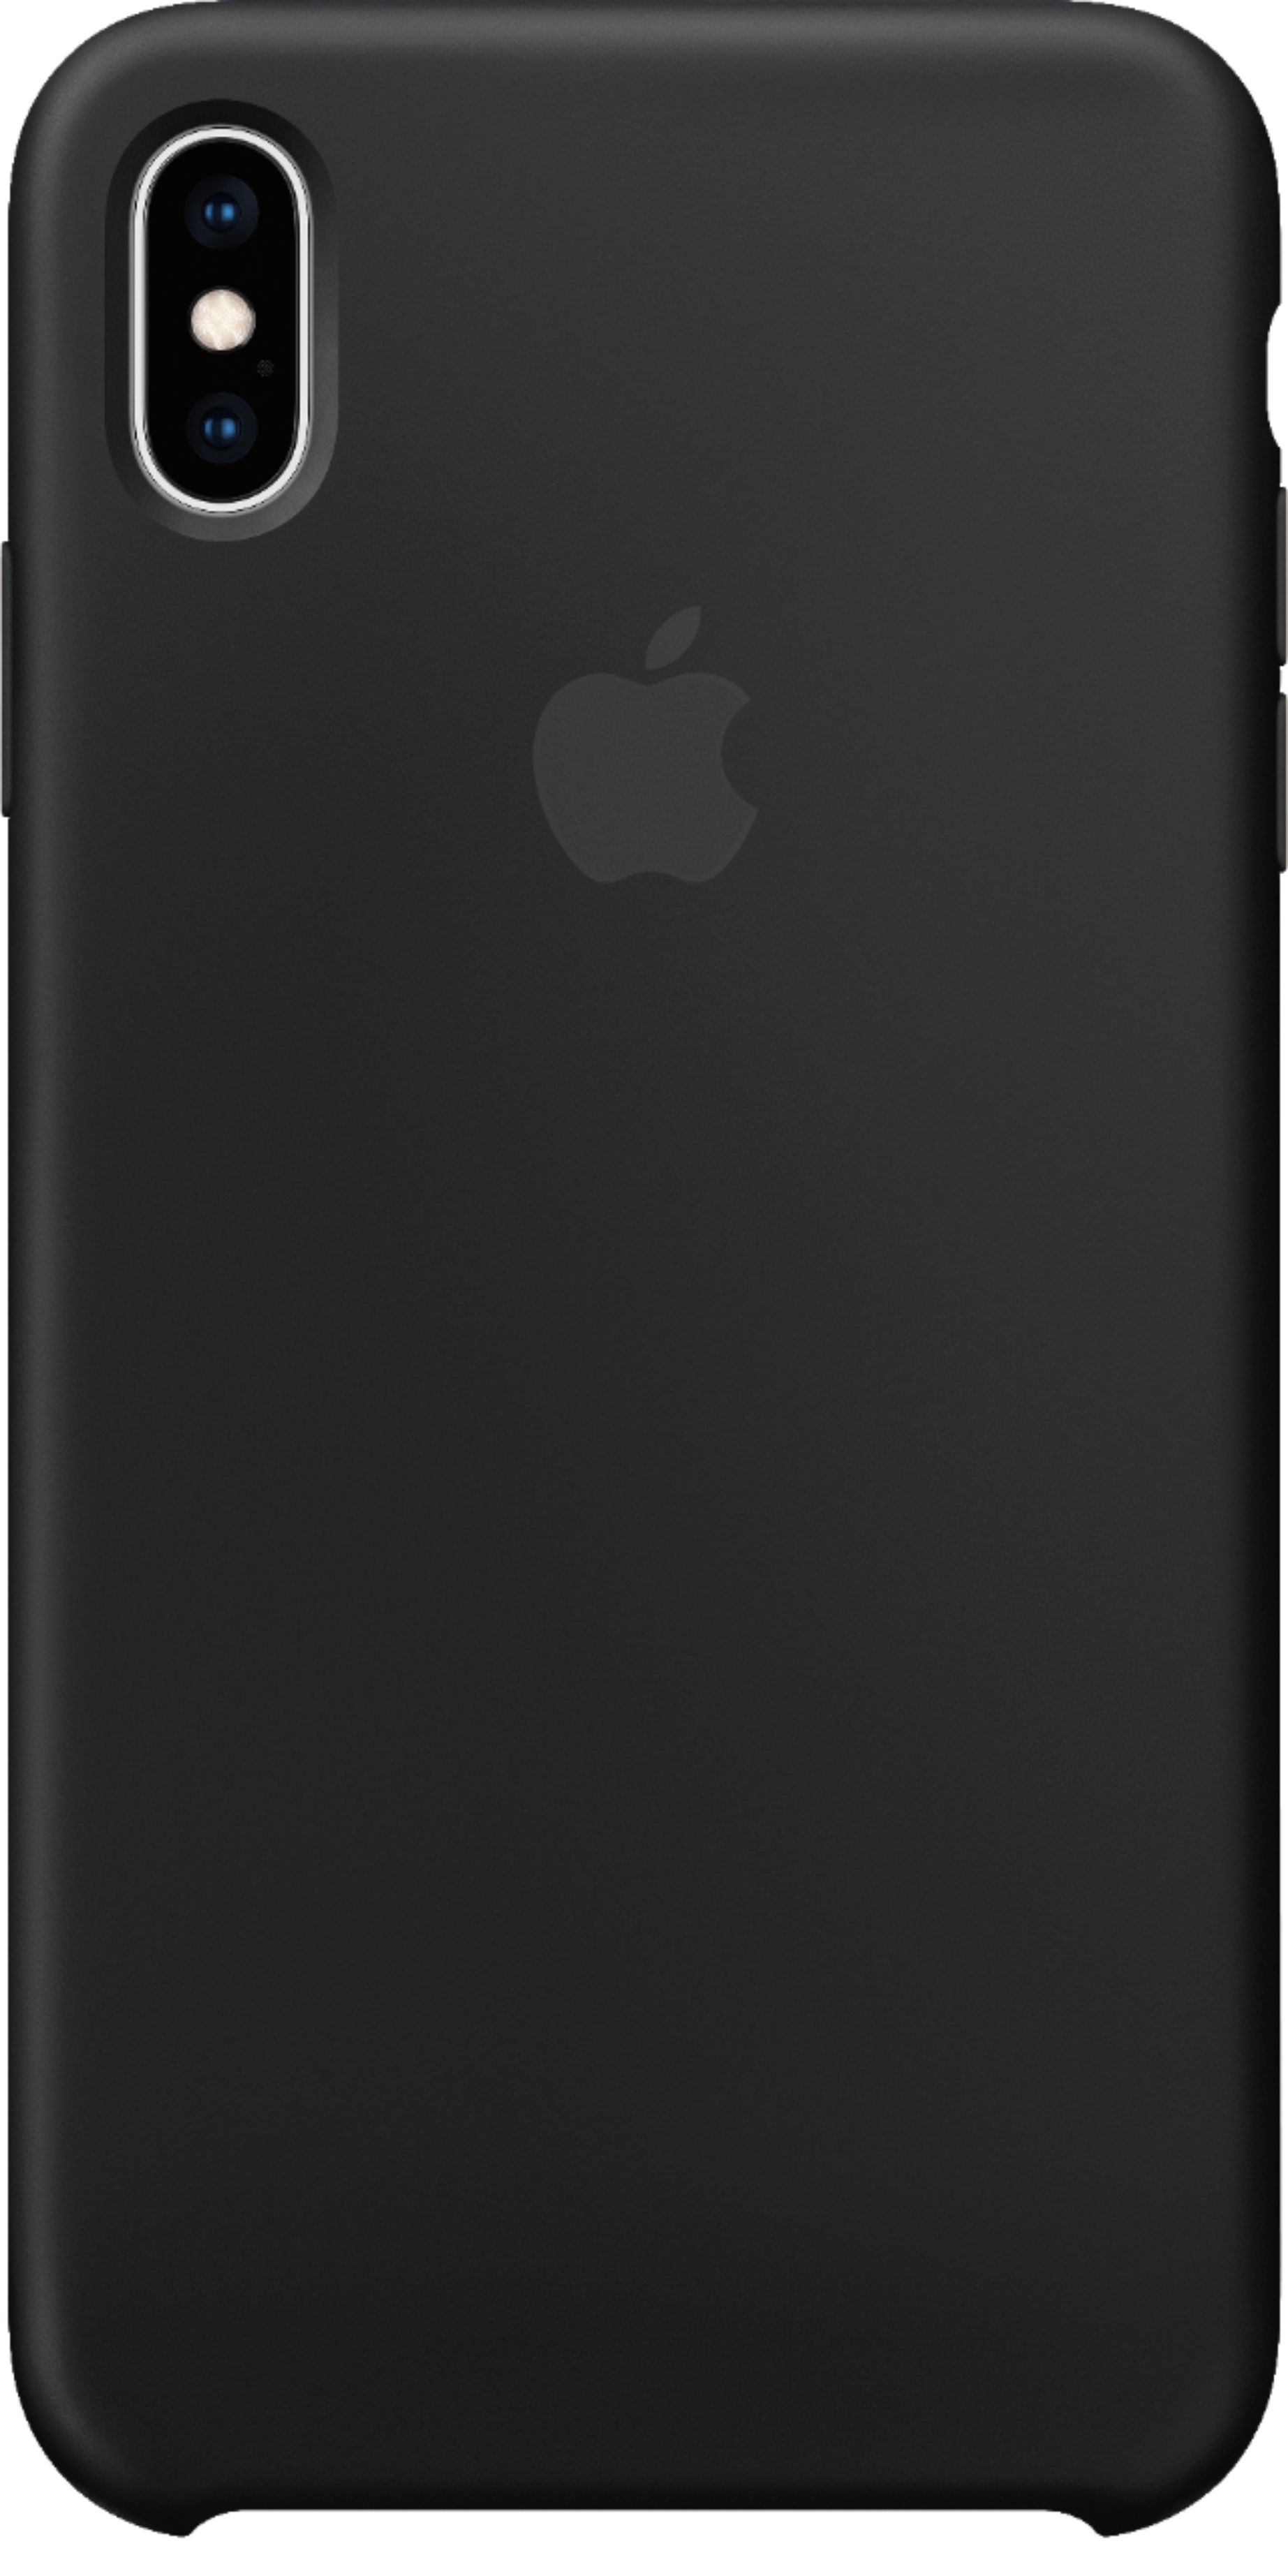 Apple iPhone® XS Max Silicone Case Black MRWE2ZM/A - Best Buy